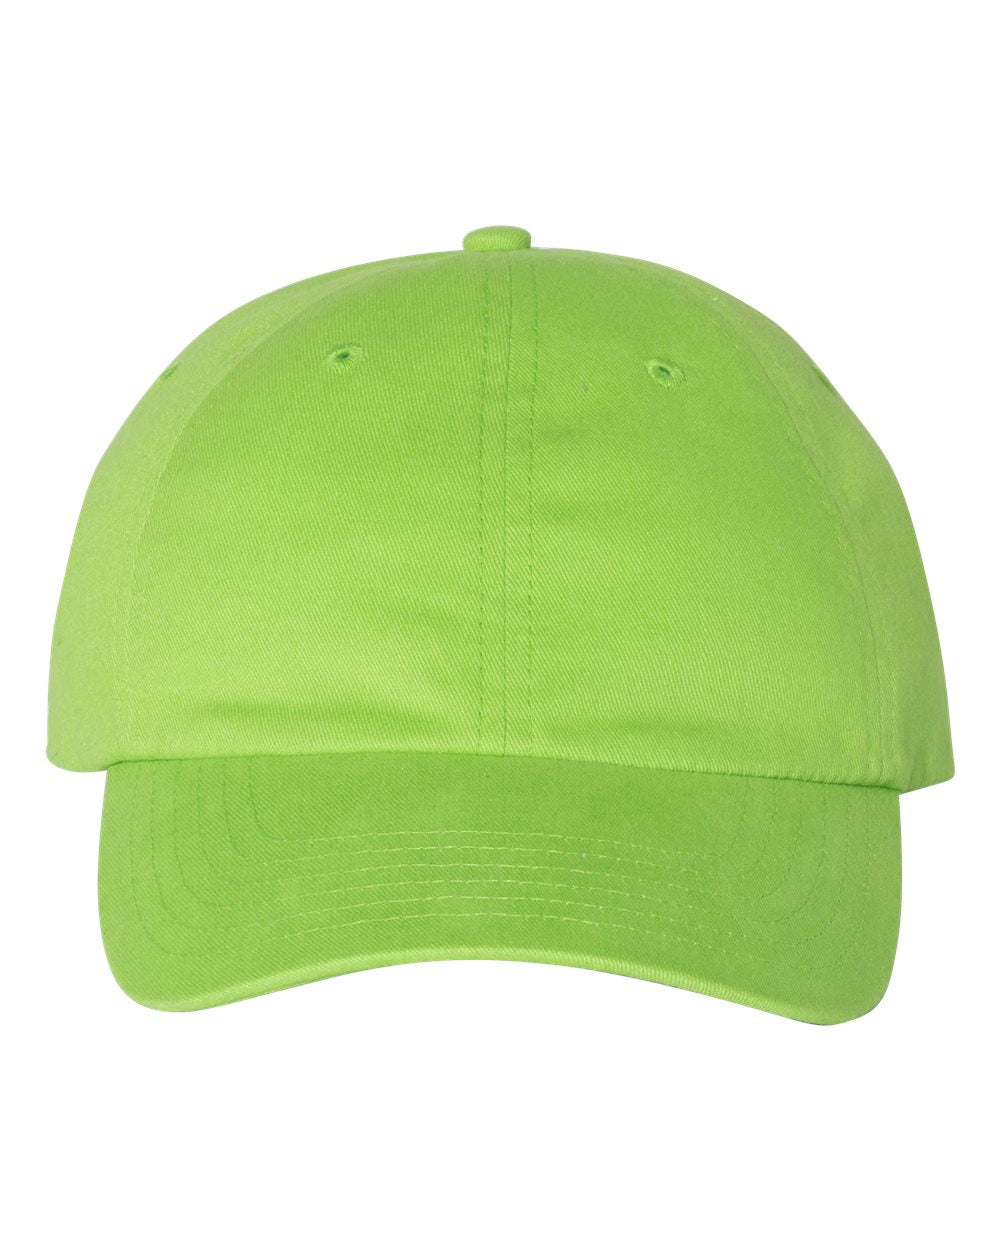 valucap brushed twill cap lime green